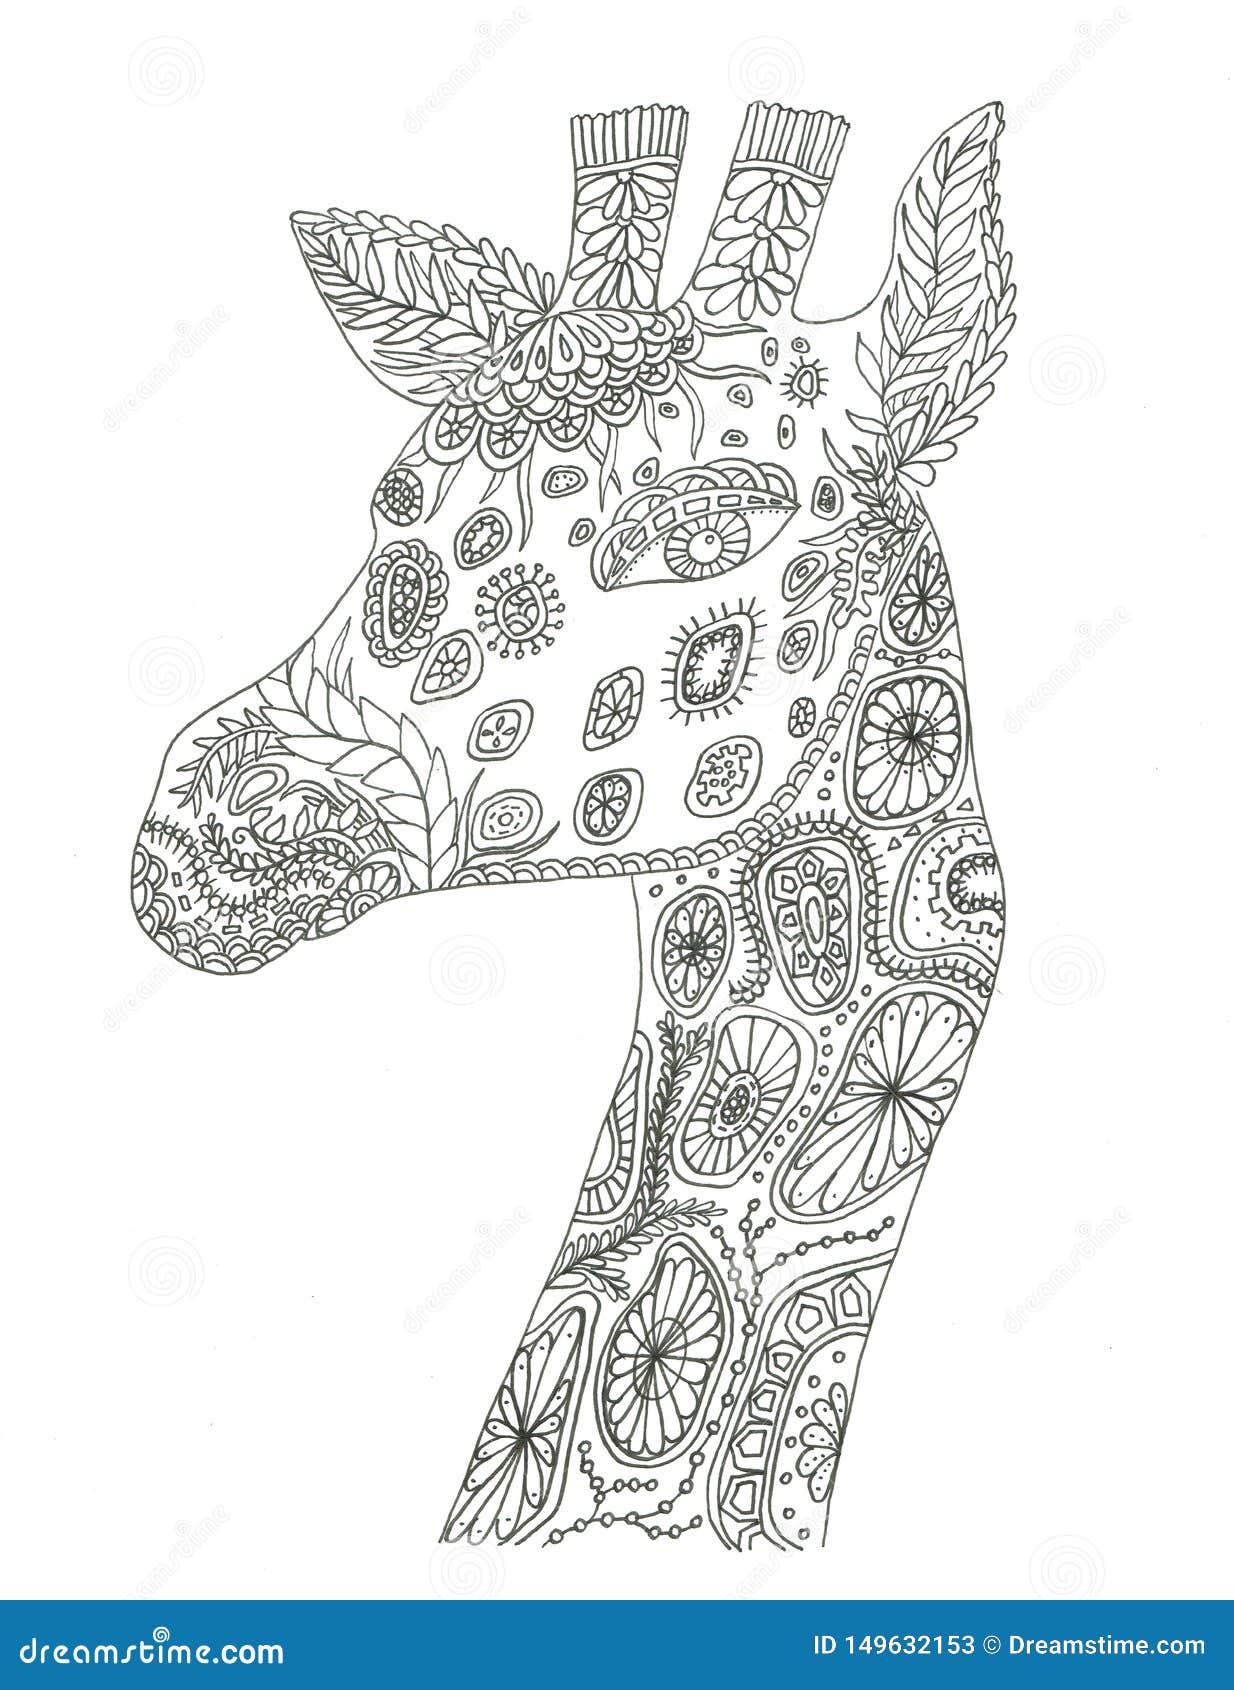 Giraffe coloring page editorial stock photo illustration of painting